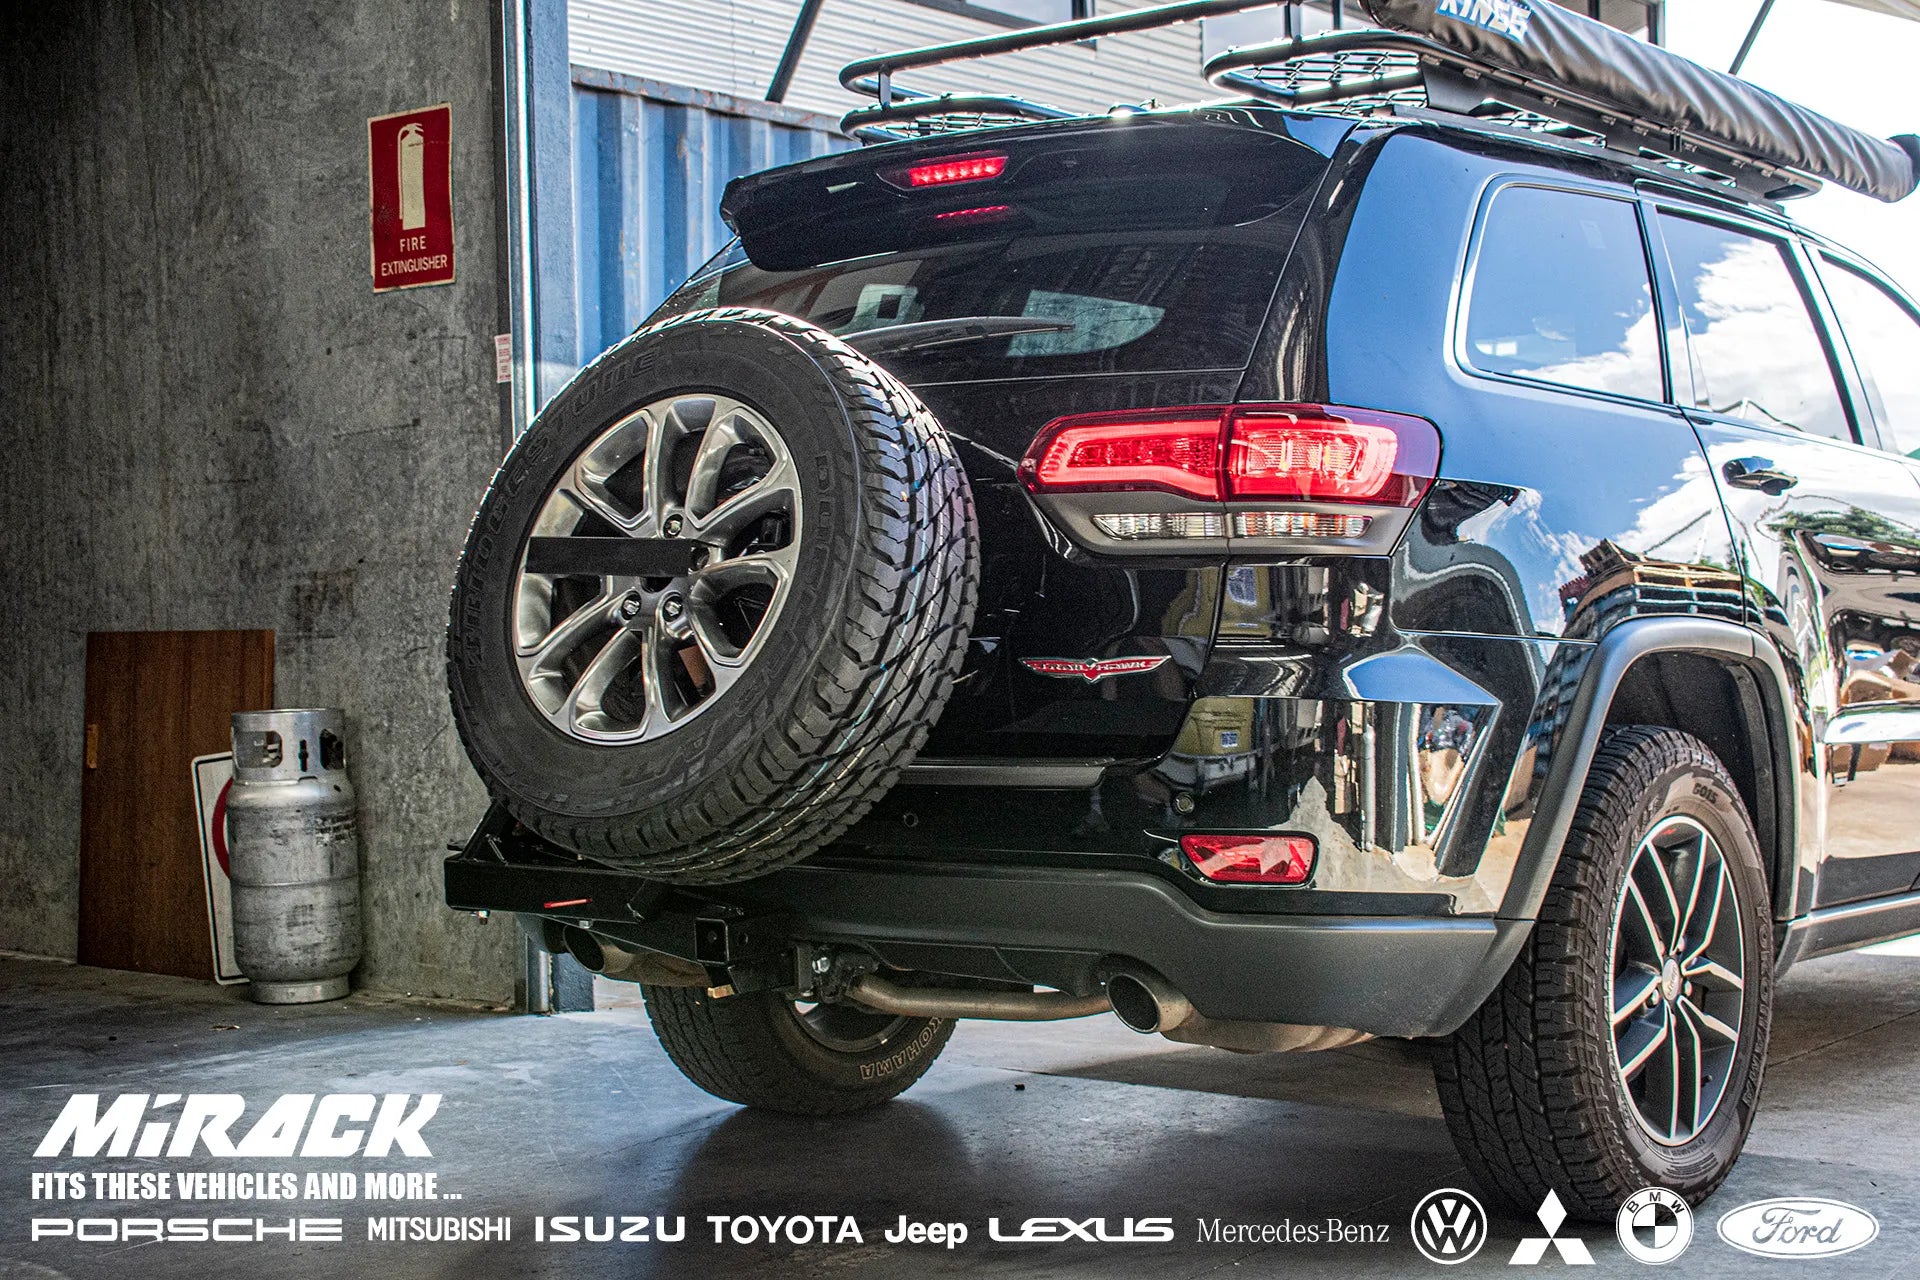 Maximize your Jeep's potential: Mirack equips your Wrangler/Grand Cherokee with versatile spare access, reliable towing, & compliant license plate holder